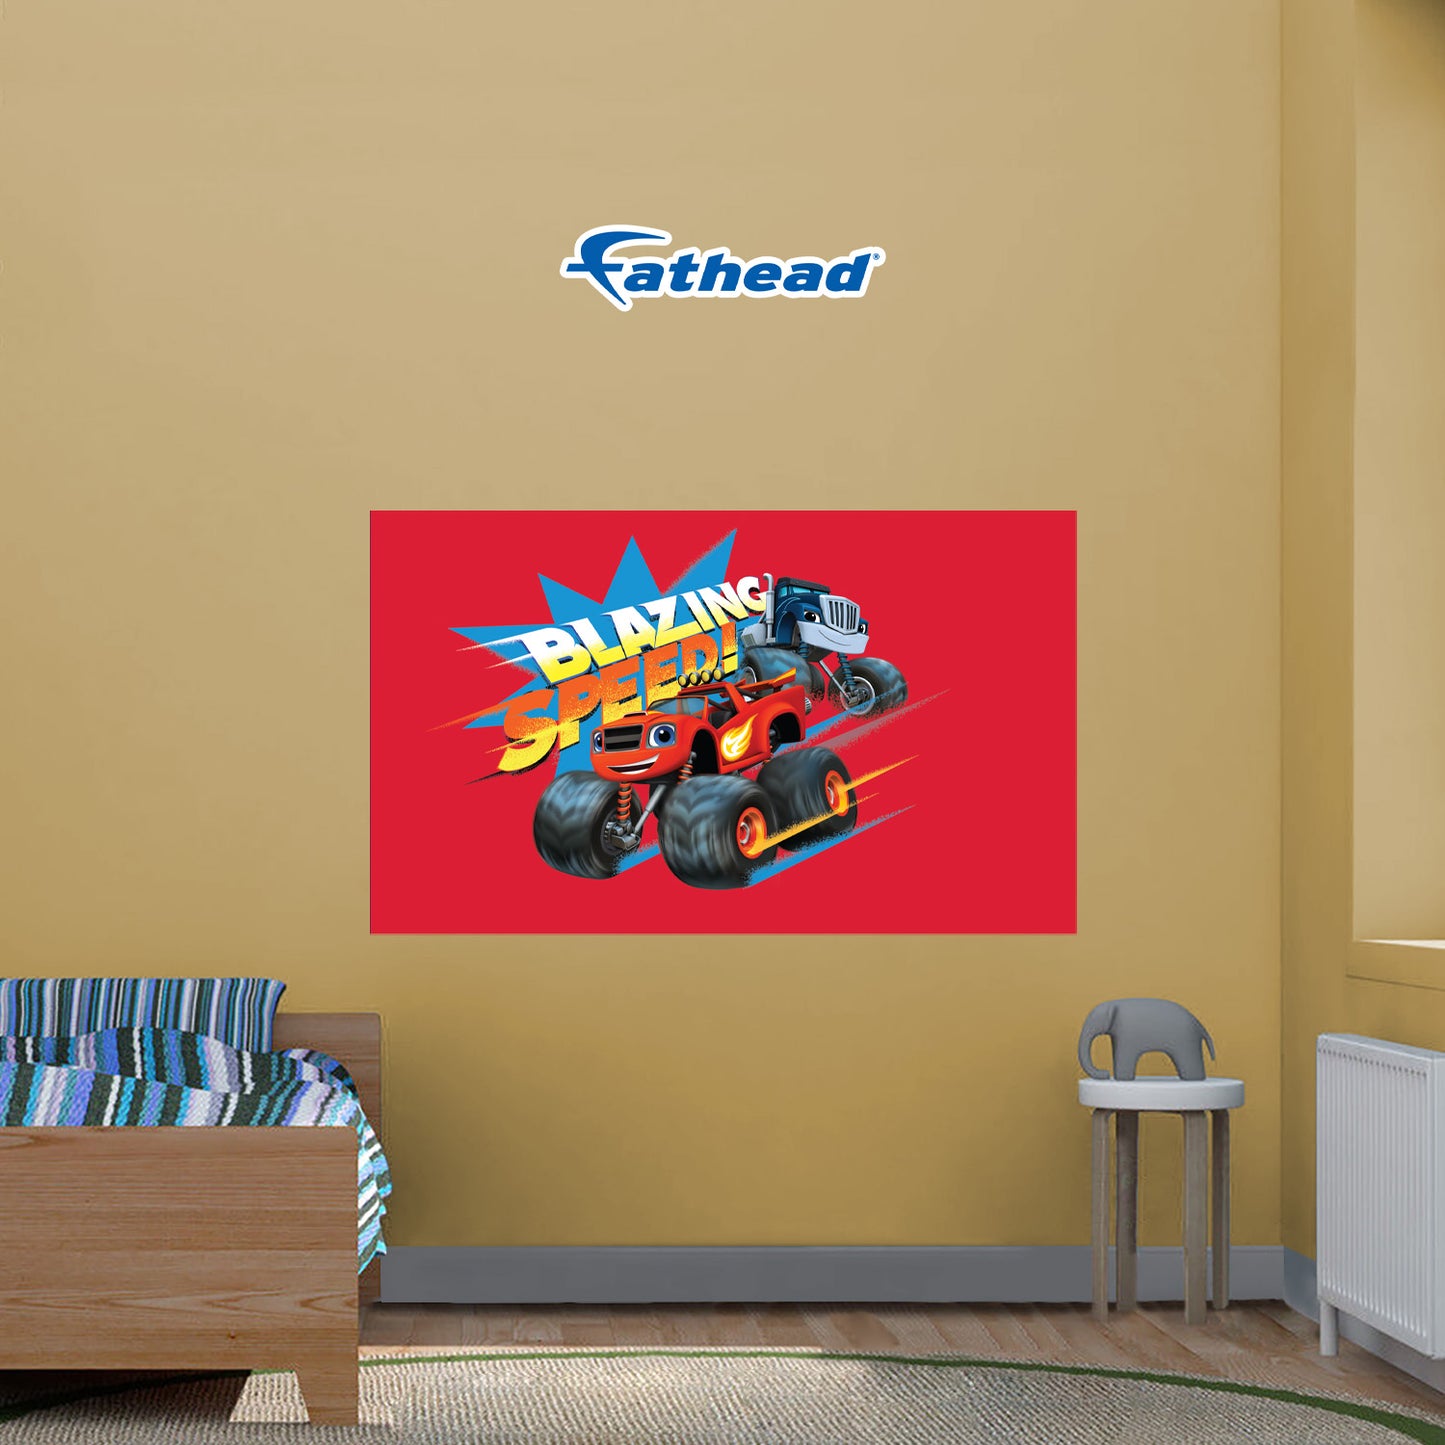 Blaze and the Monster Machines: Speed Poster - Officially Licensed Nickelodeon Removable Adhesive Decal